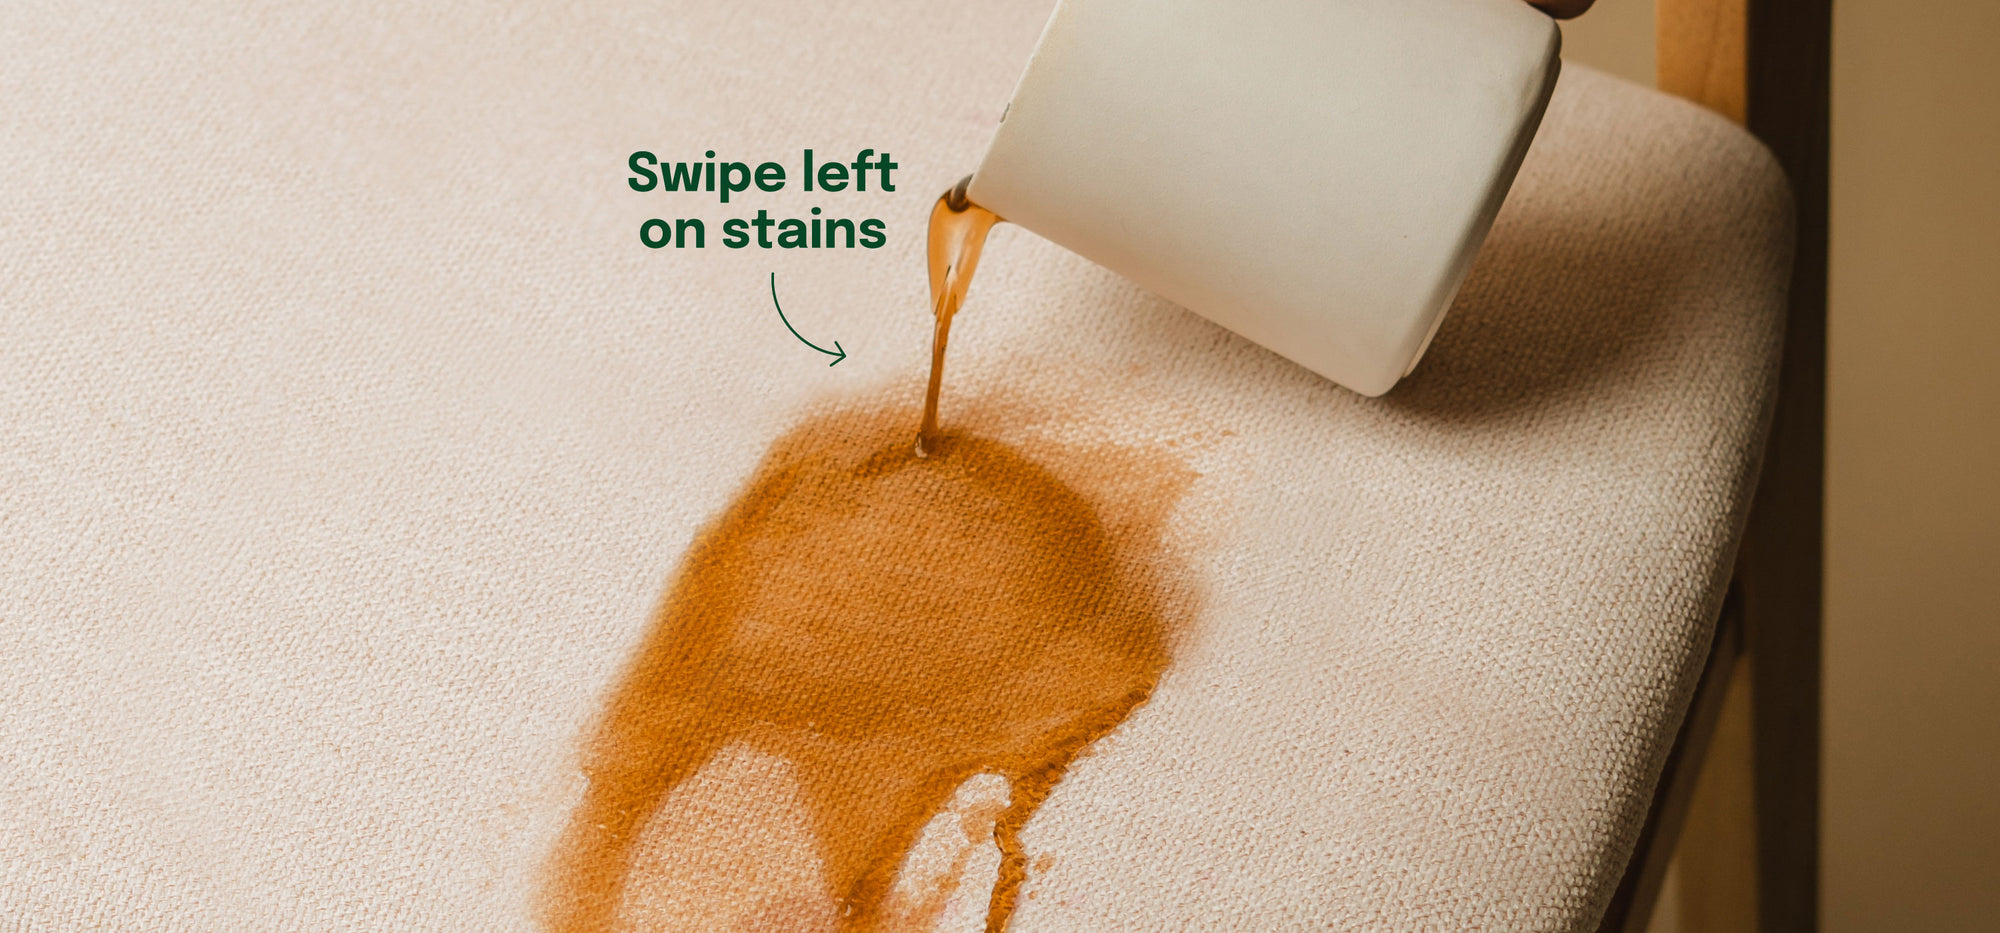 swipe left on stains, coffee penetrating into not protected chair